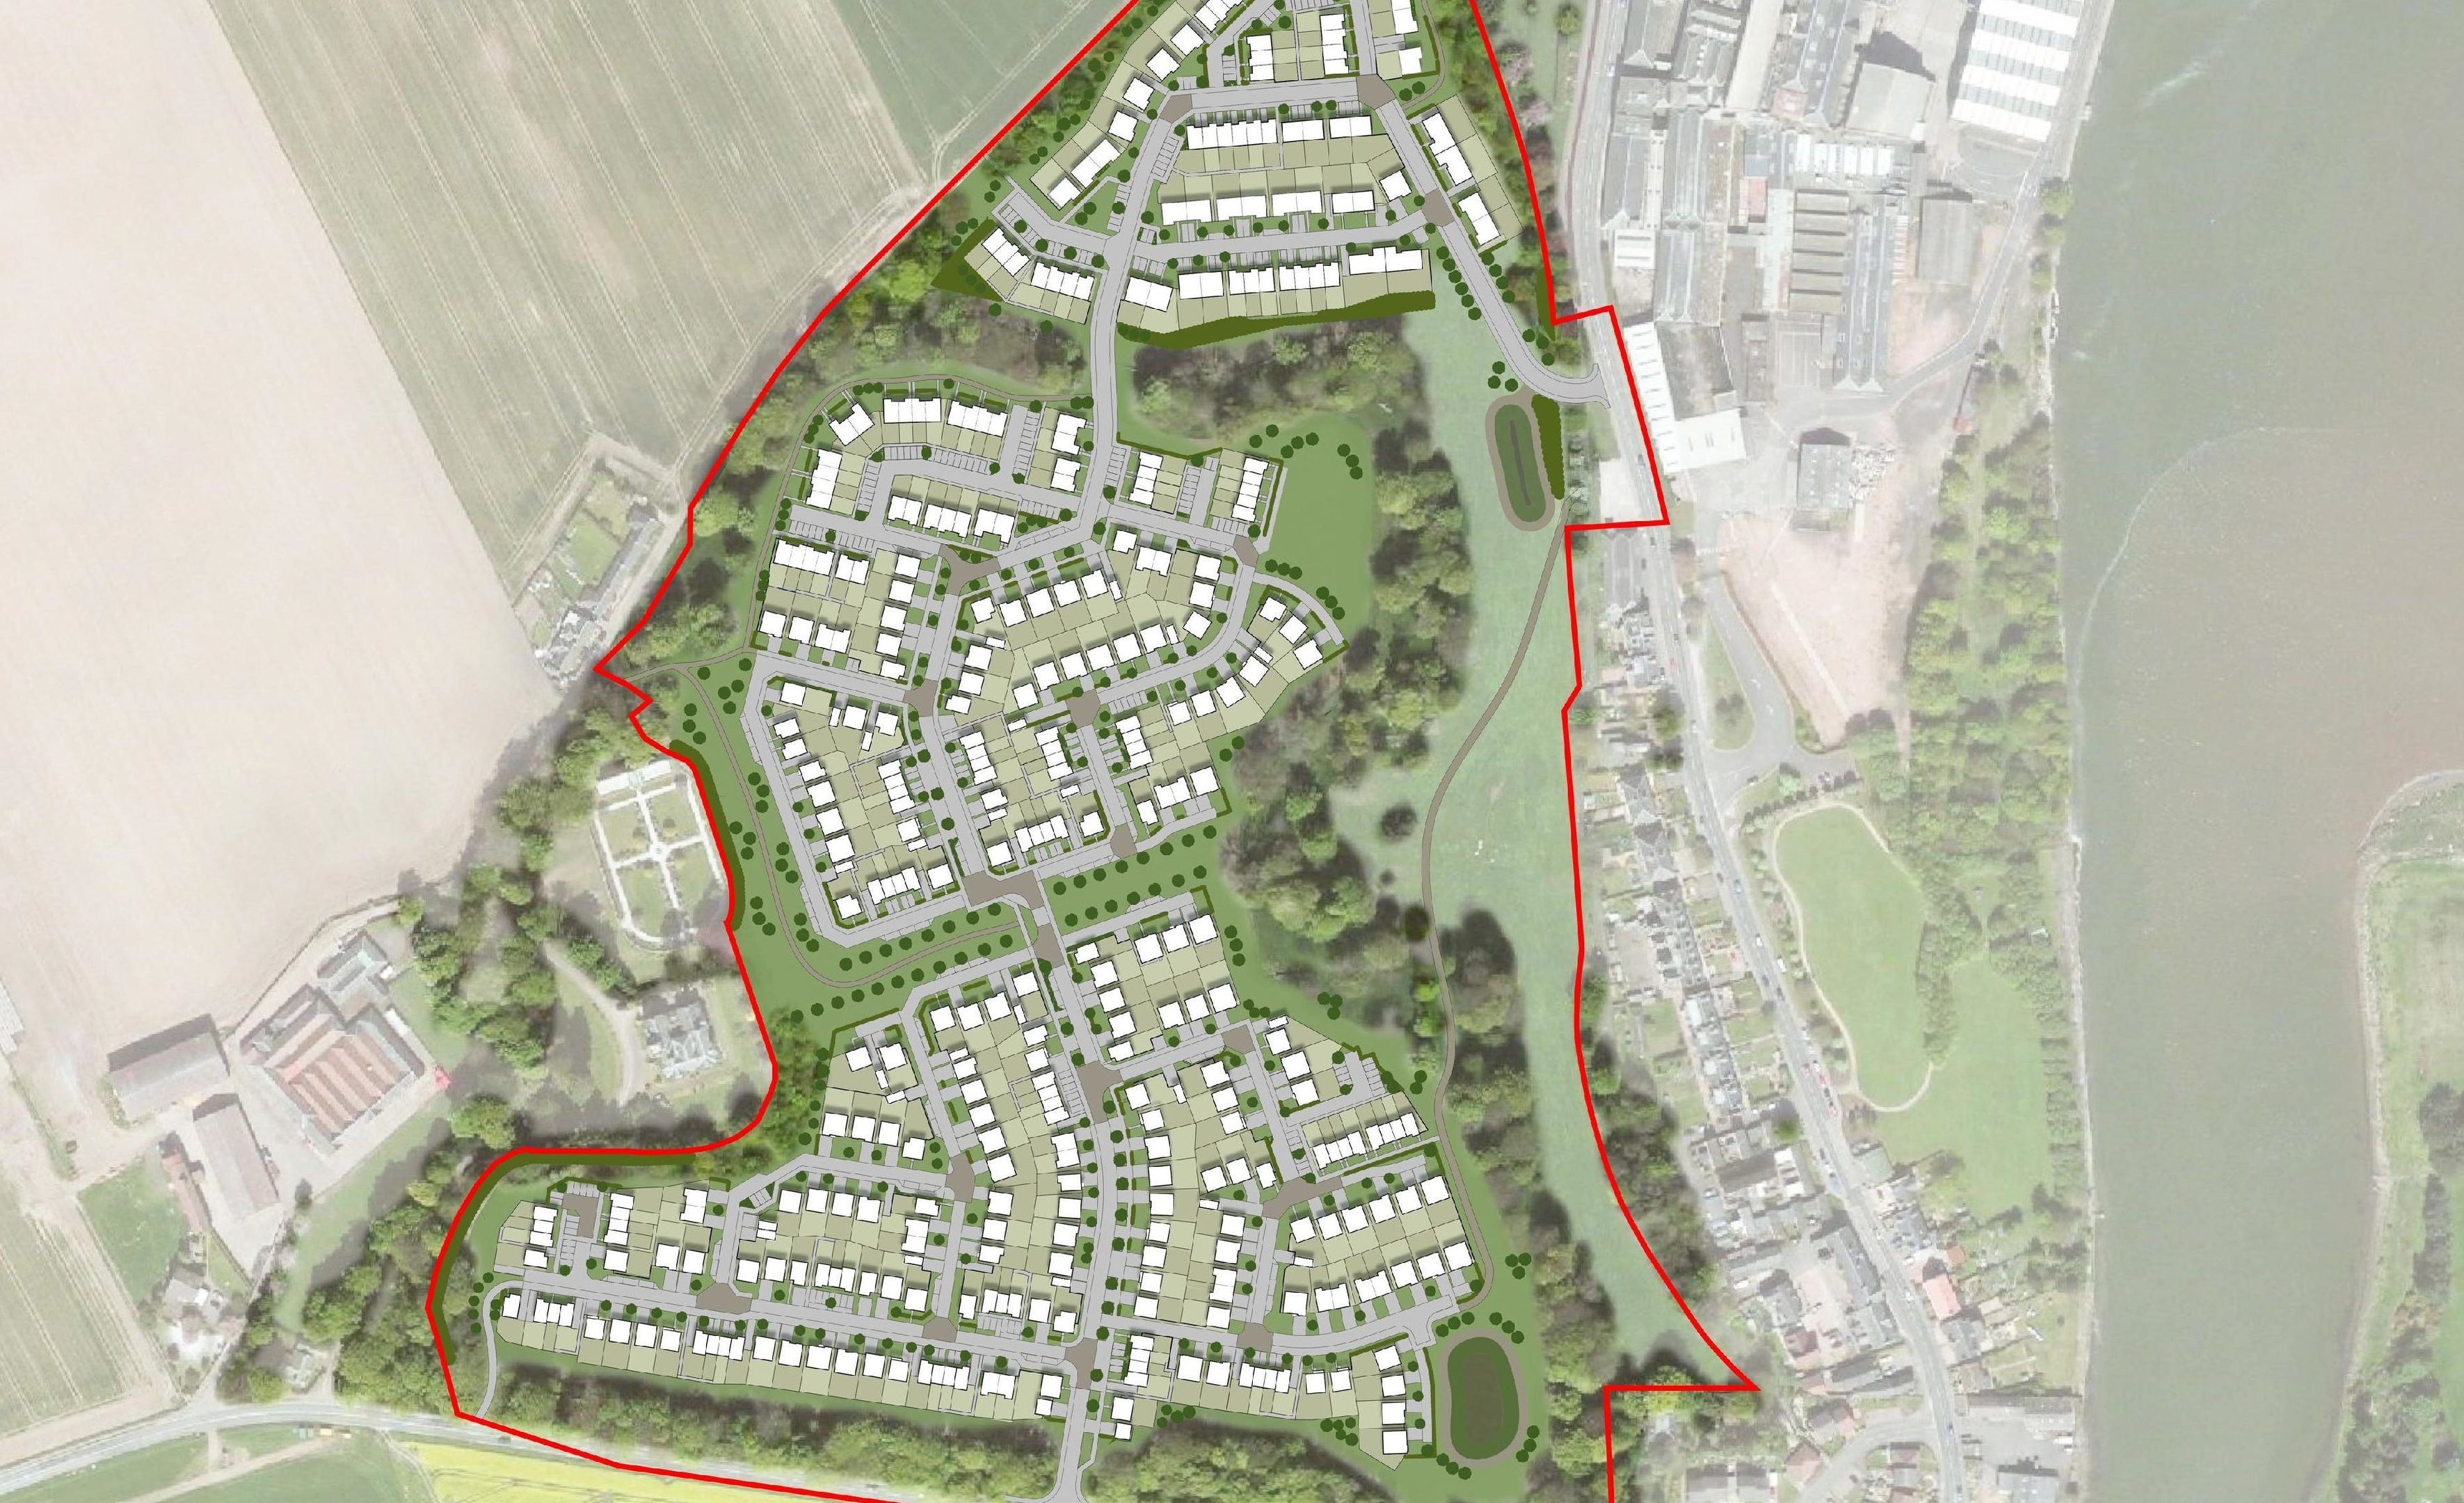 A map showing the proposed development in Guardbridge